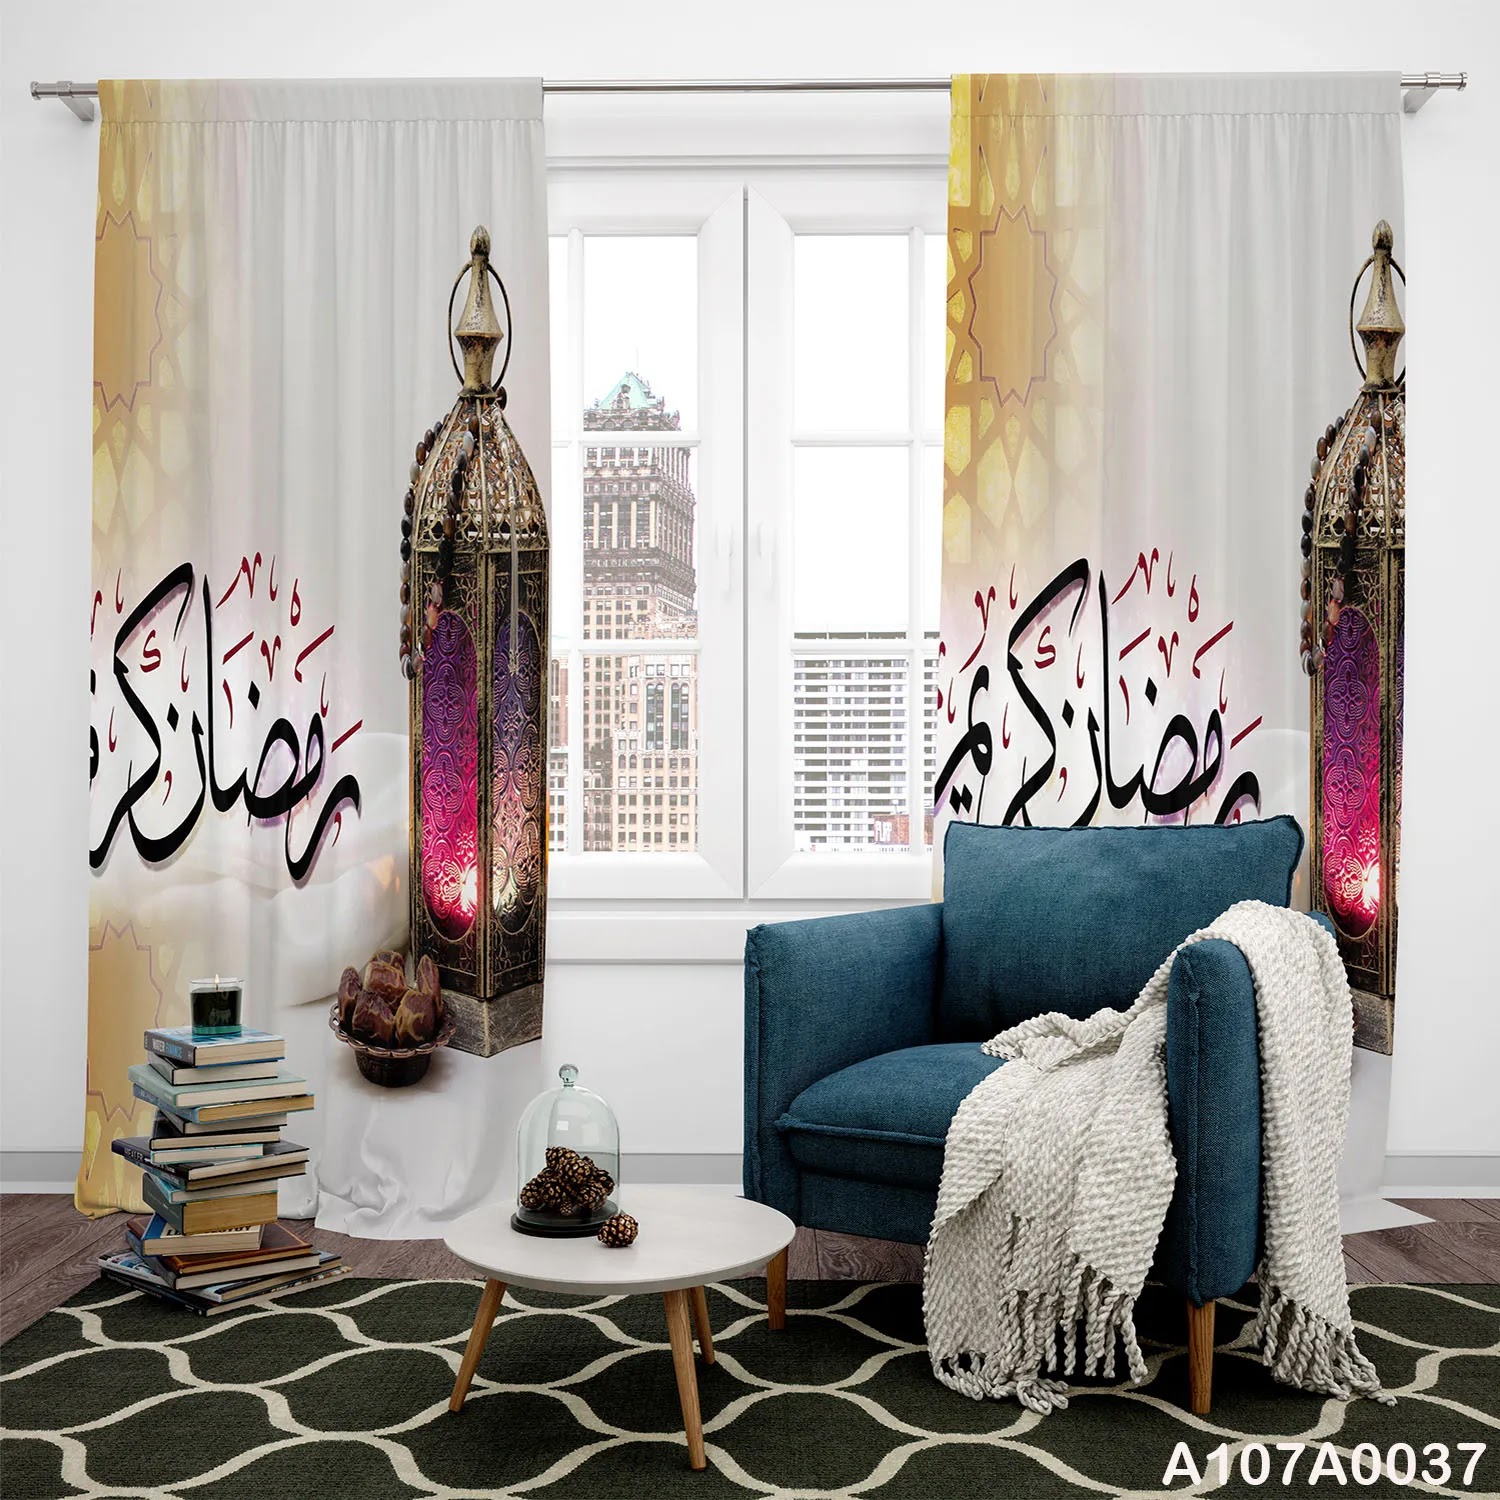 Curtains in white and gold with Ramadan lantern